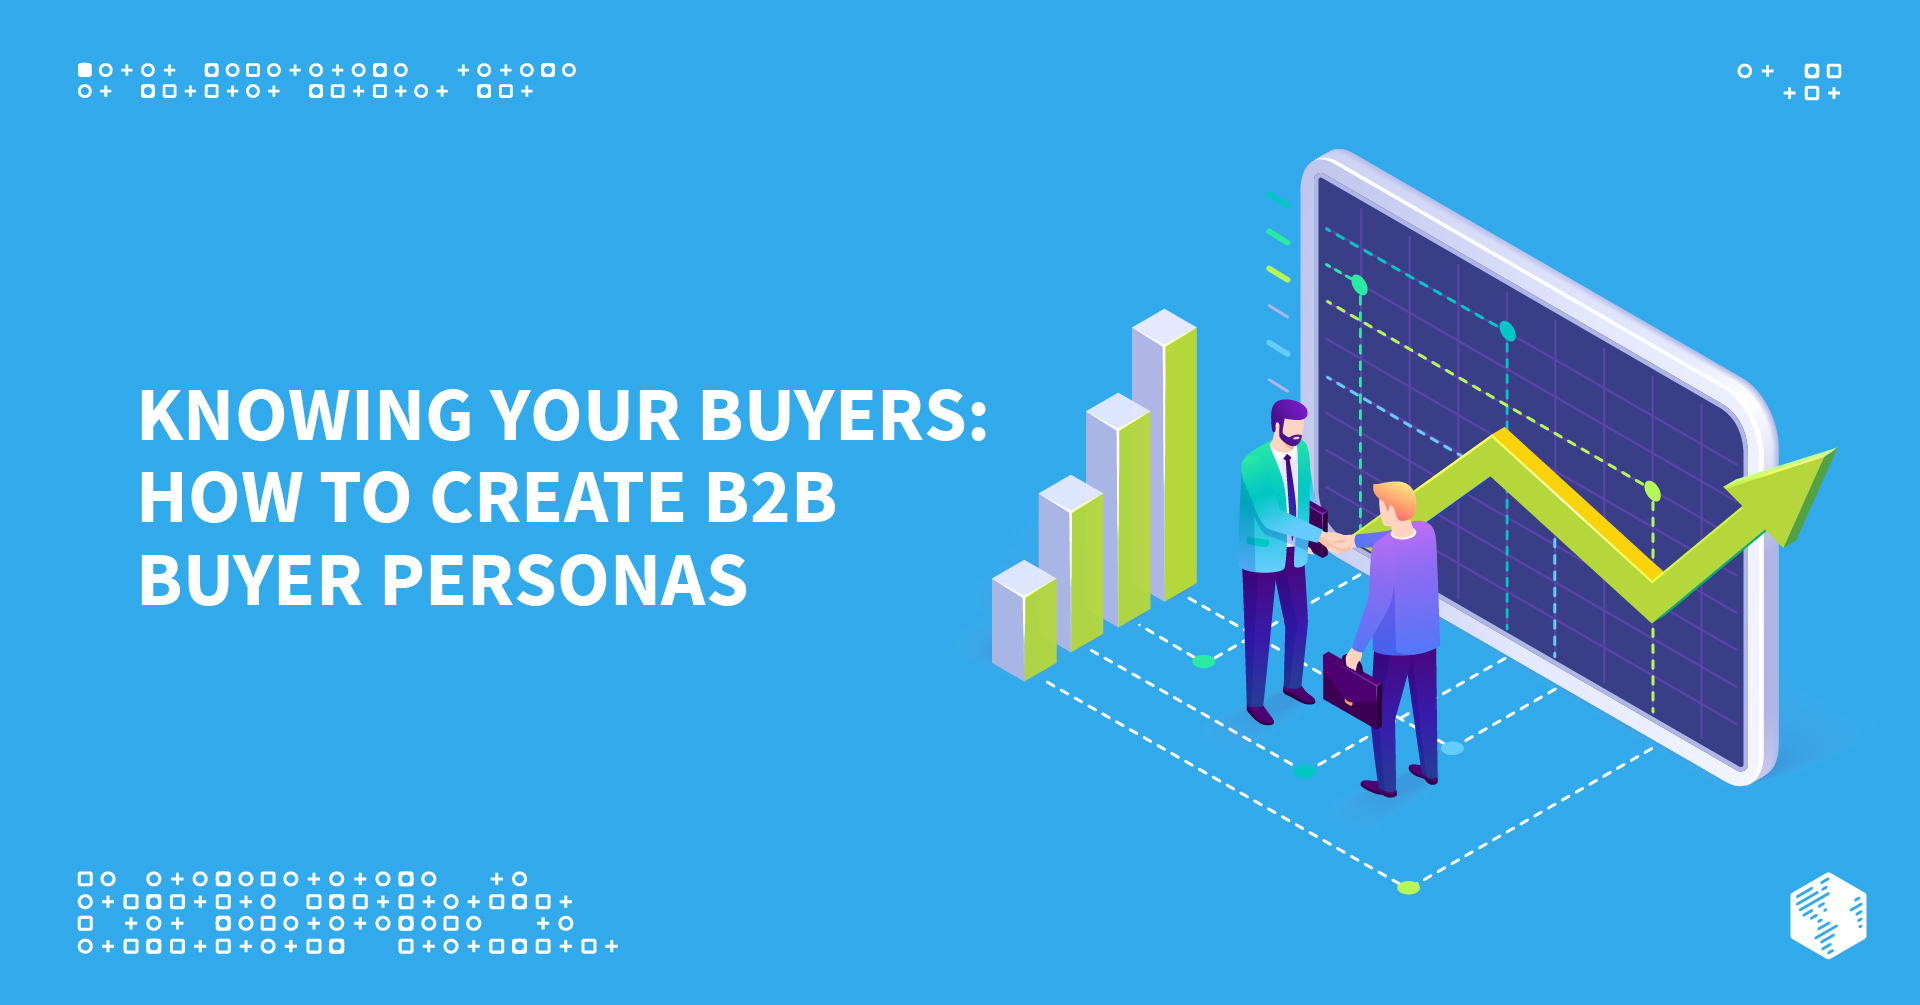 Know Your Buyers: How to Create B2B Buyer Personas